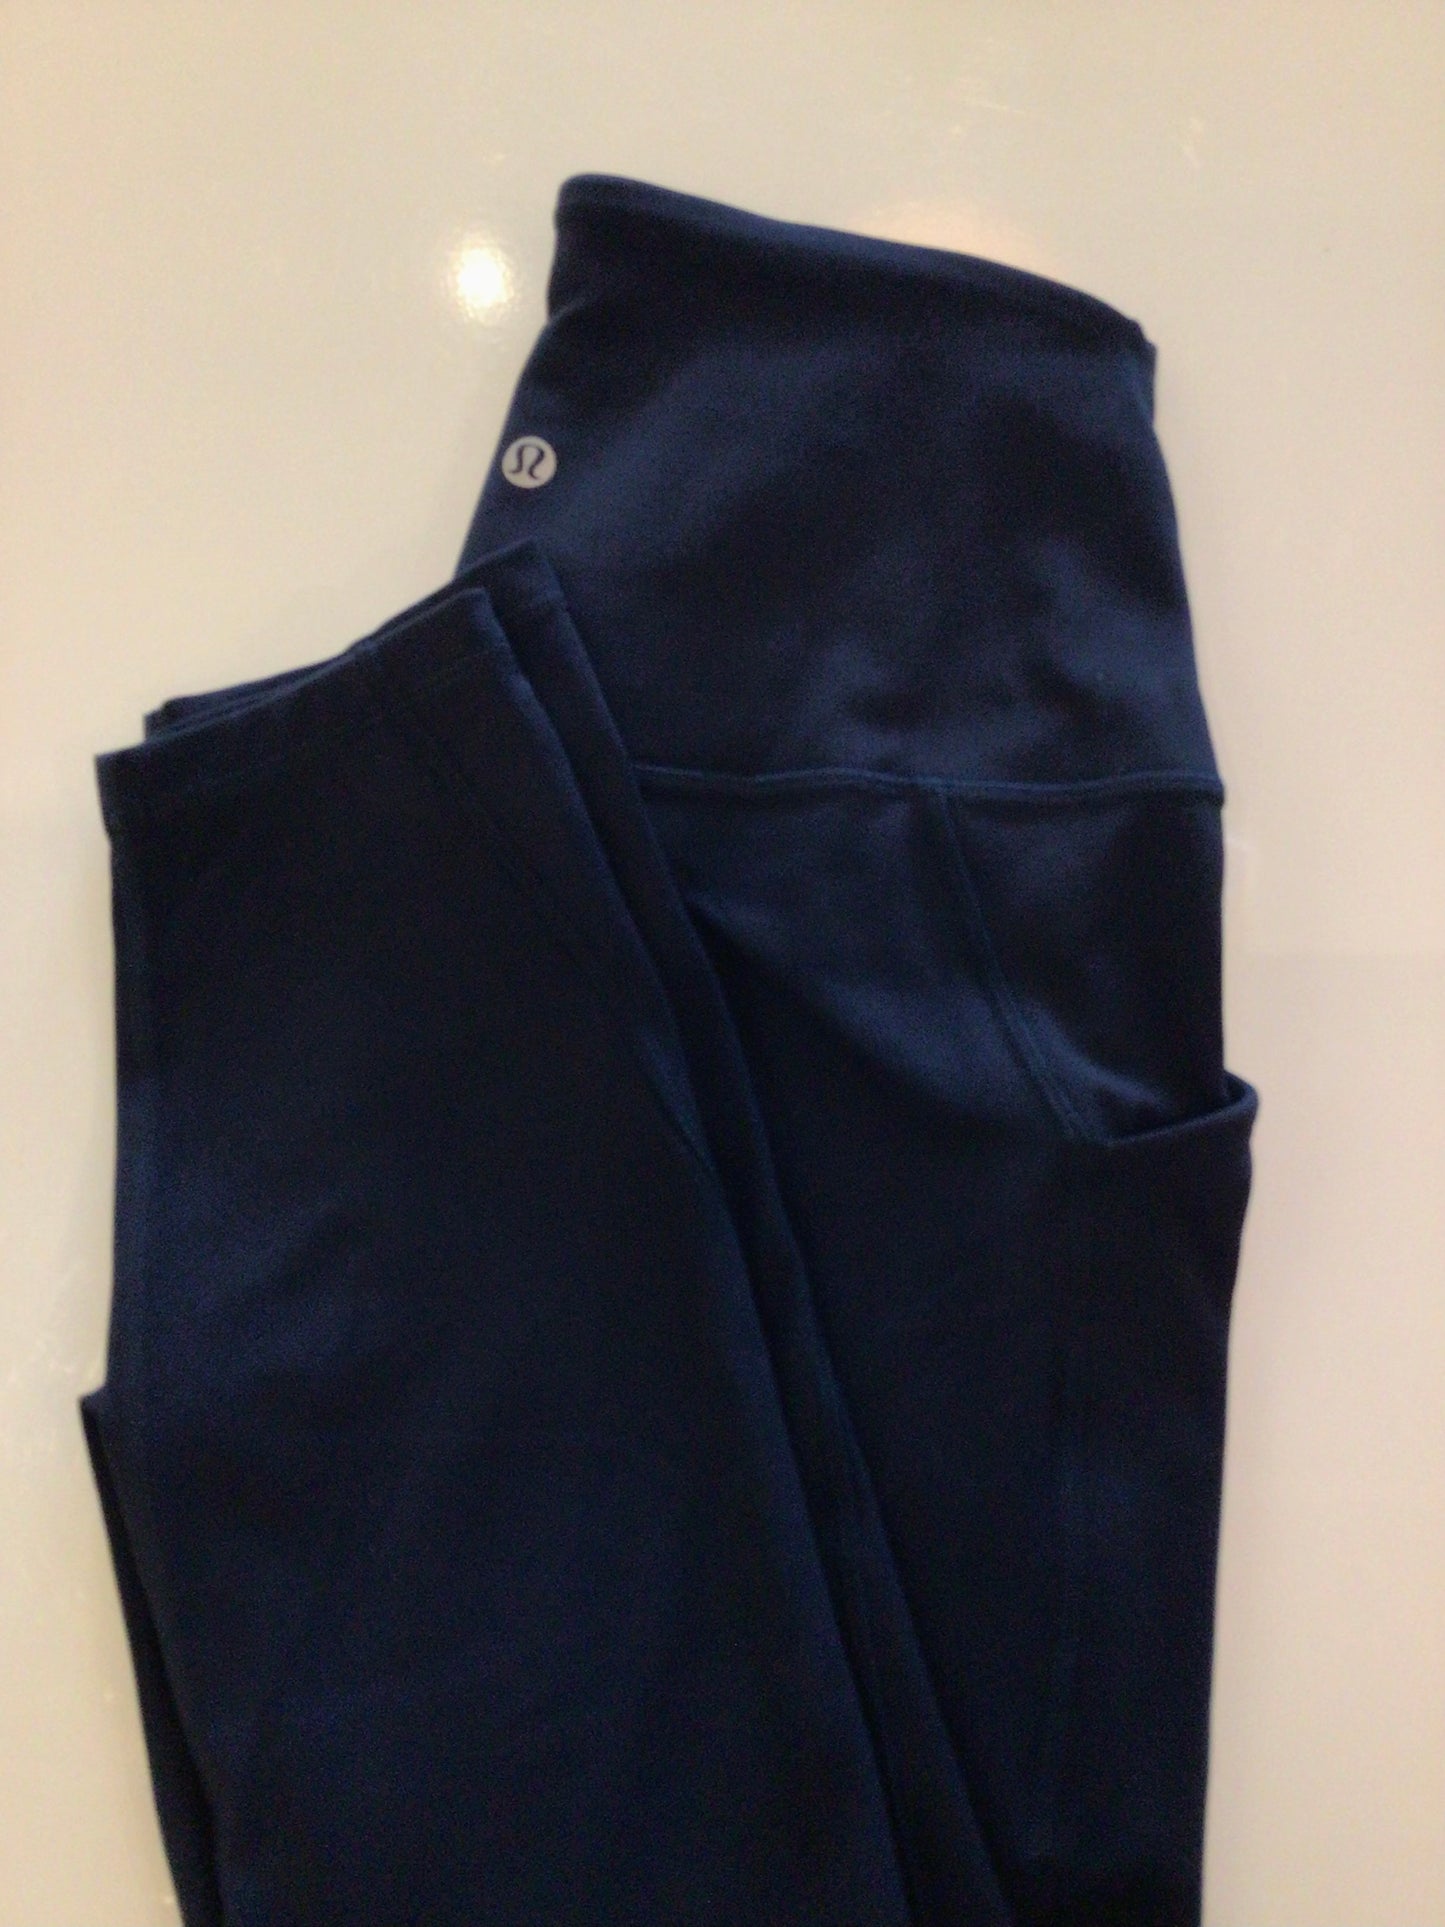 Consignment 4475-07 Lululemon NWT. High rise navy tights with back side pockets. Size 8.